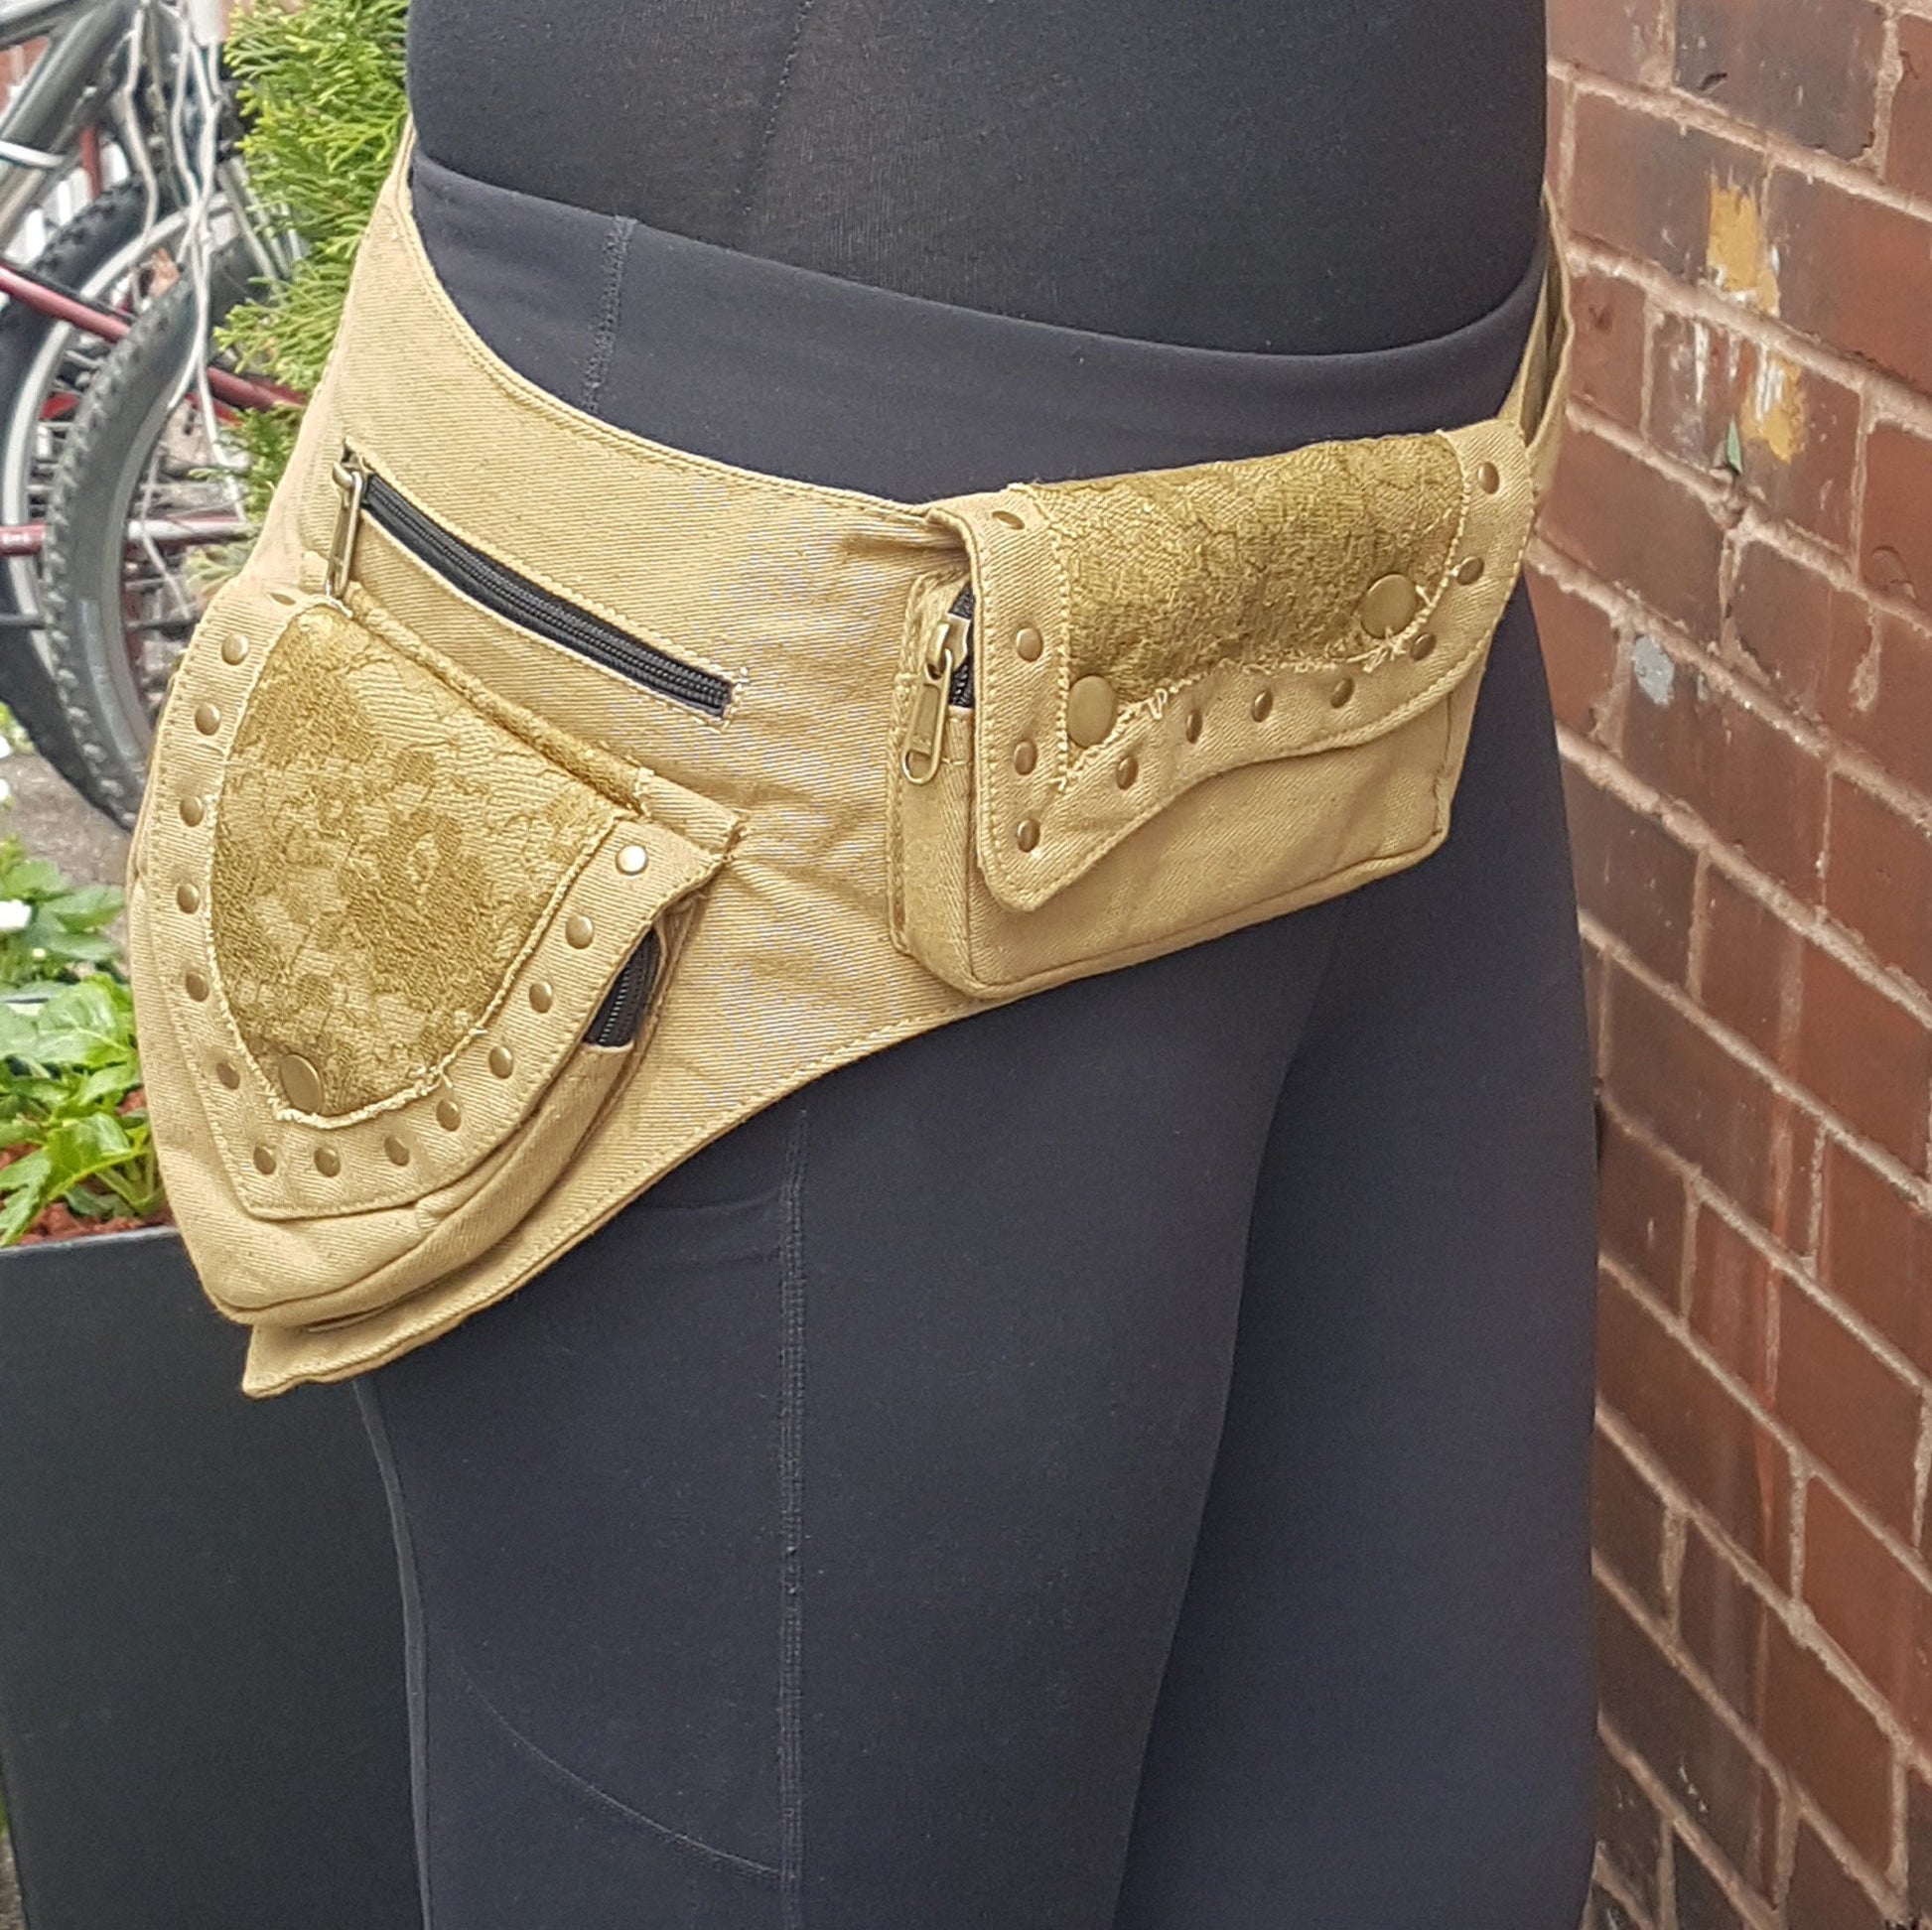 Utility belt with 5 pockets. Festival bum bag with a gender neutral design. Adjustable to 48 inches. Fanny pack money belt for travel & fun. - Vintage India Ca